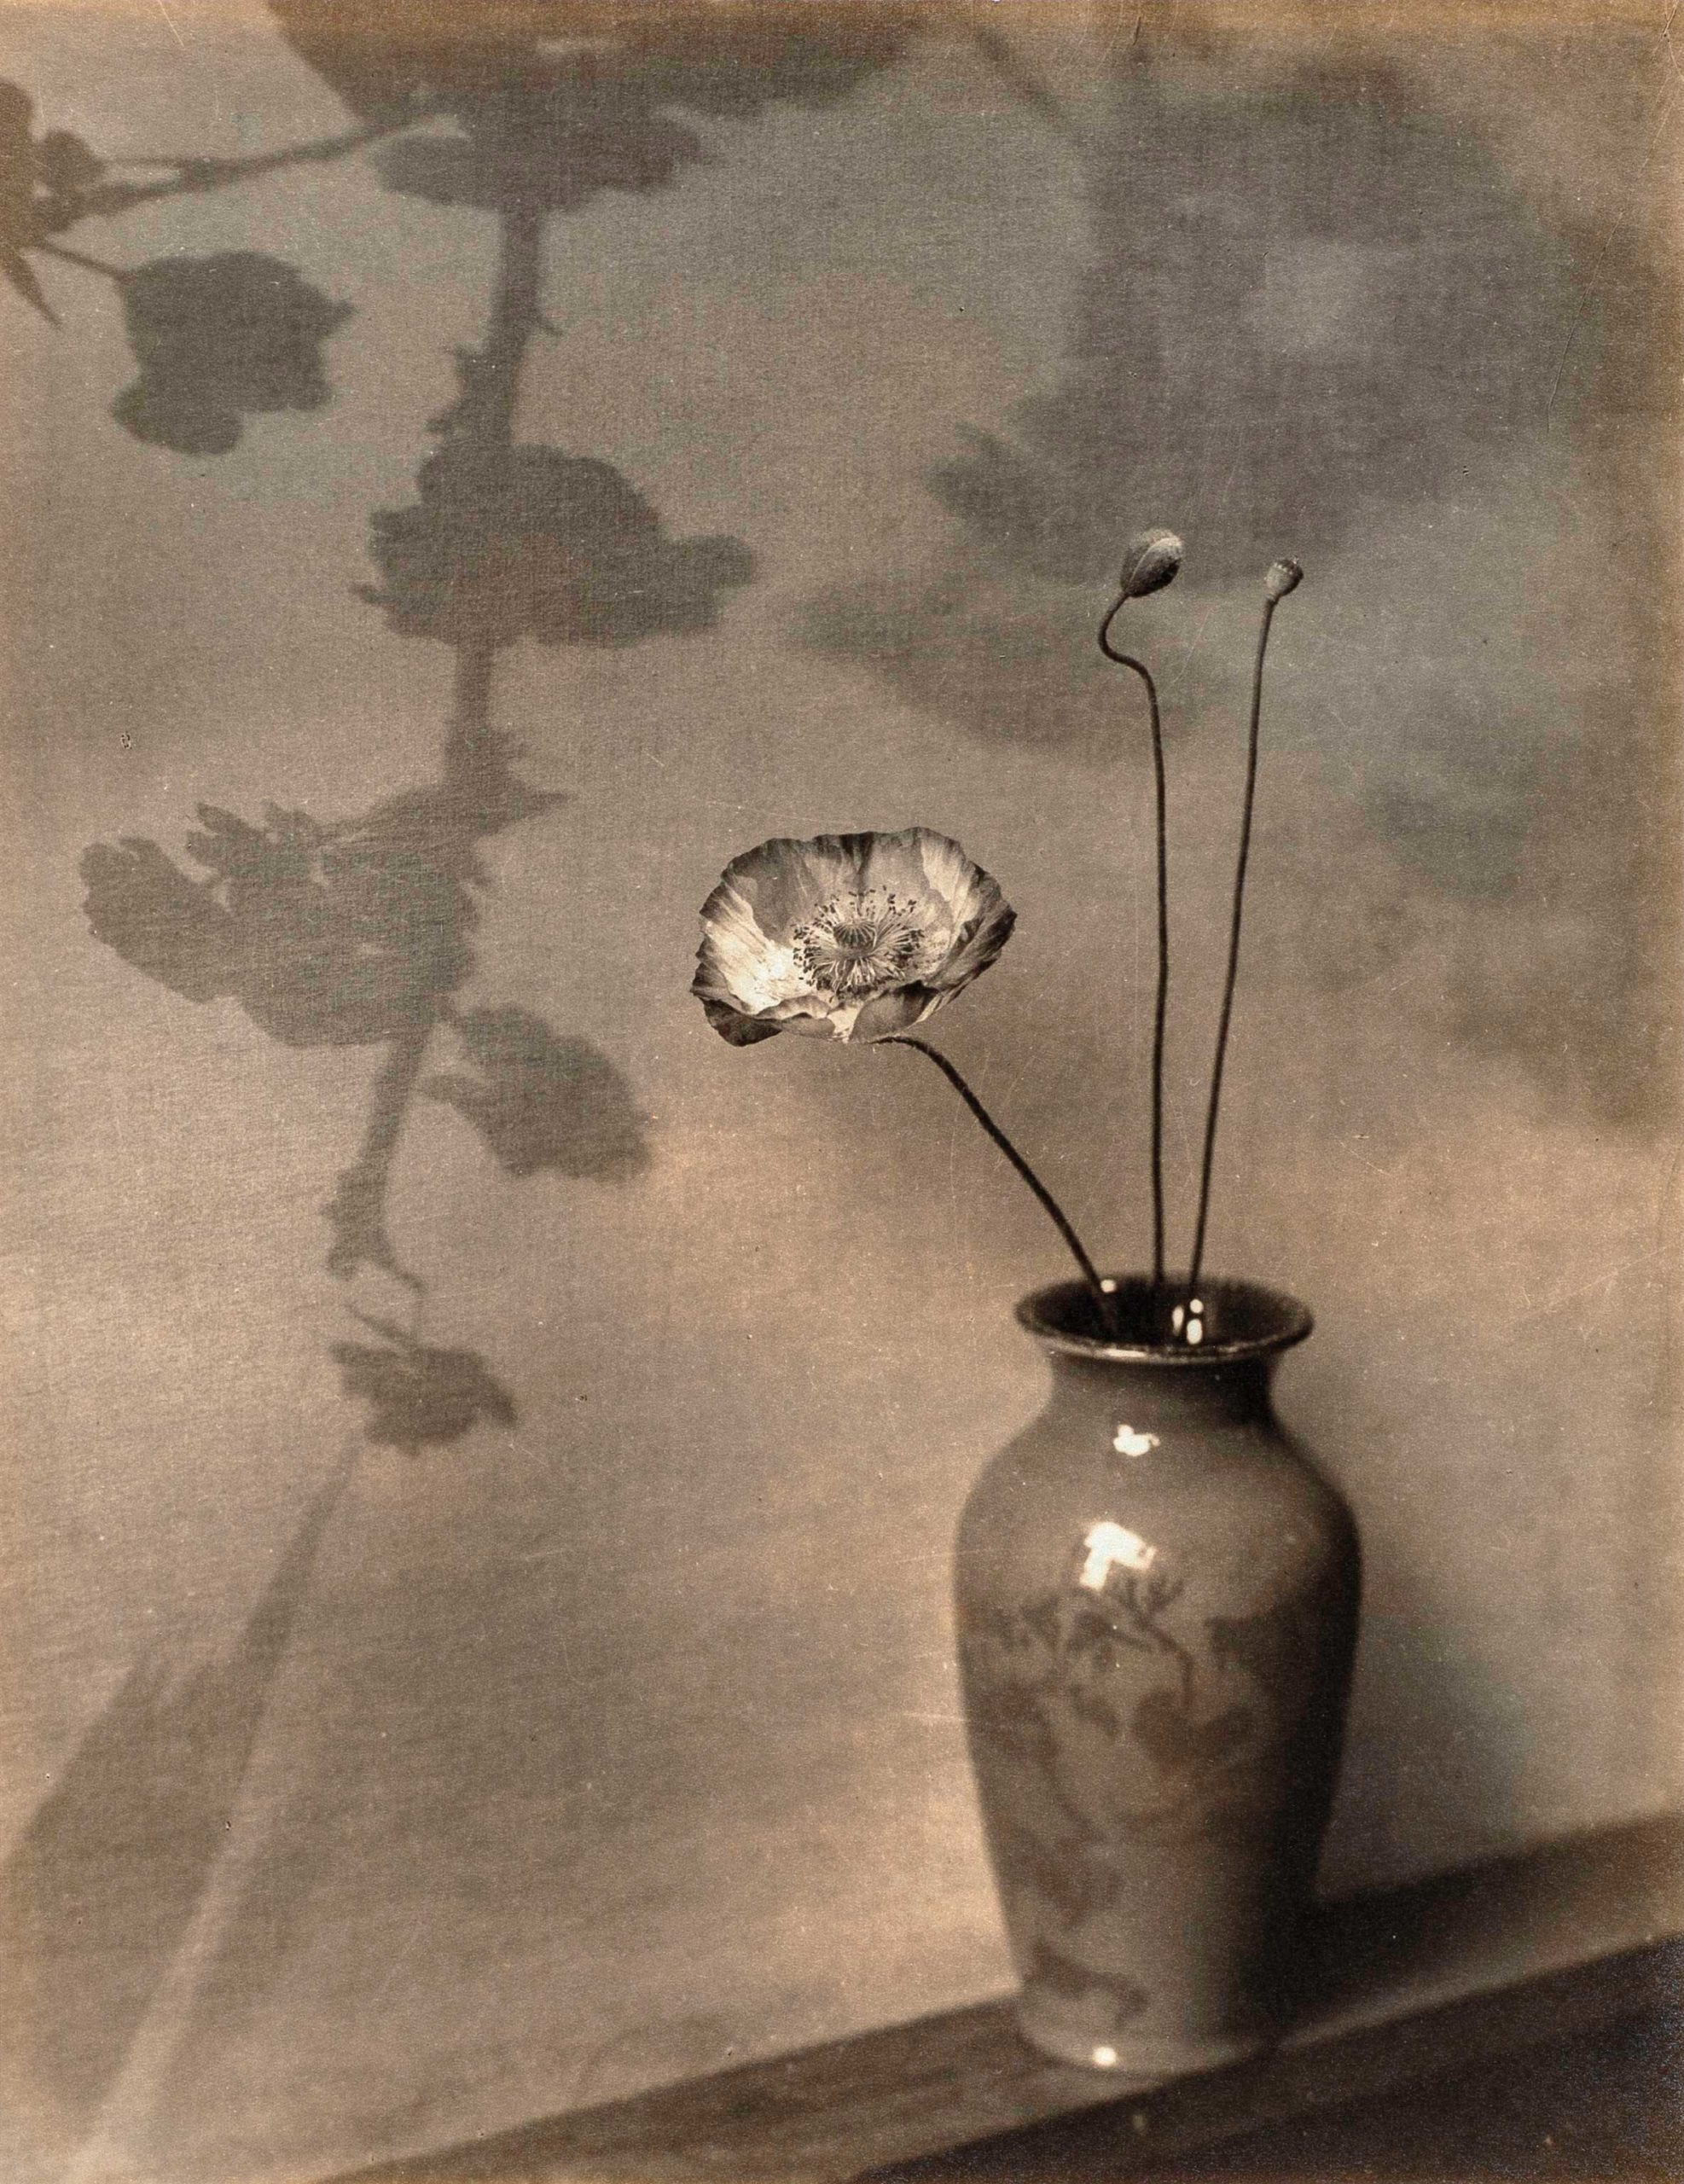 Ella McBride, A Shirley Poppy, 1925. Gelatin silver print on Textura tissue, 9½ × 7¼ inches, Private collection, Photo © TAM, photo by Lou Cuevas